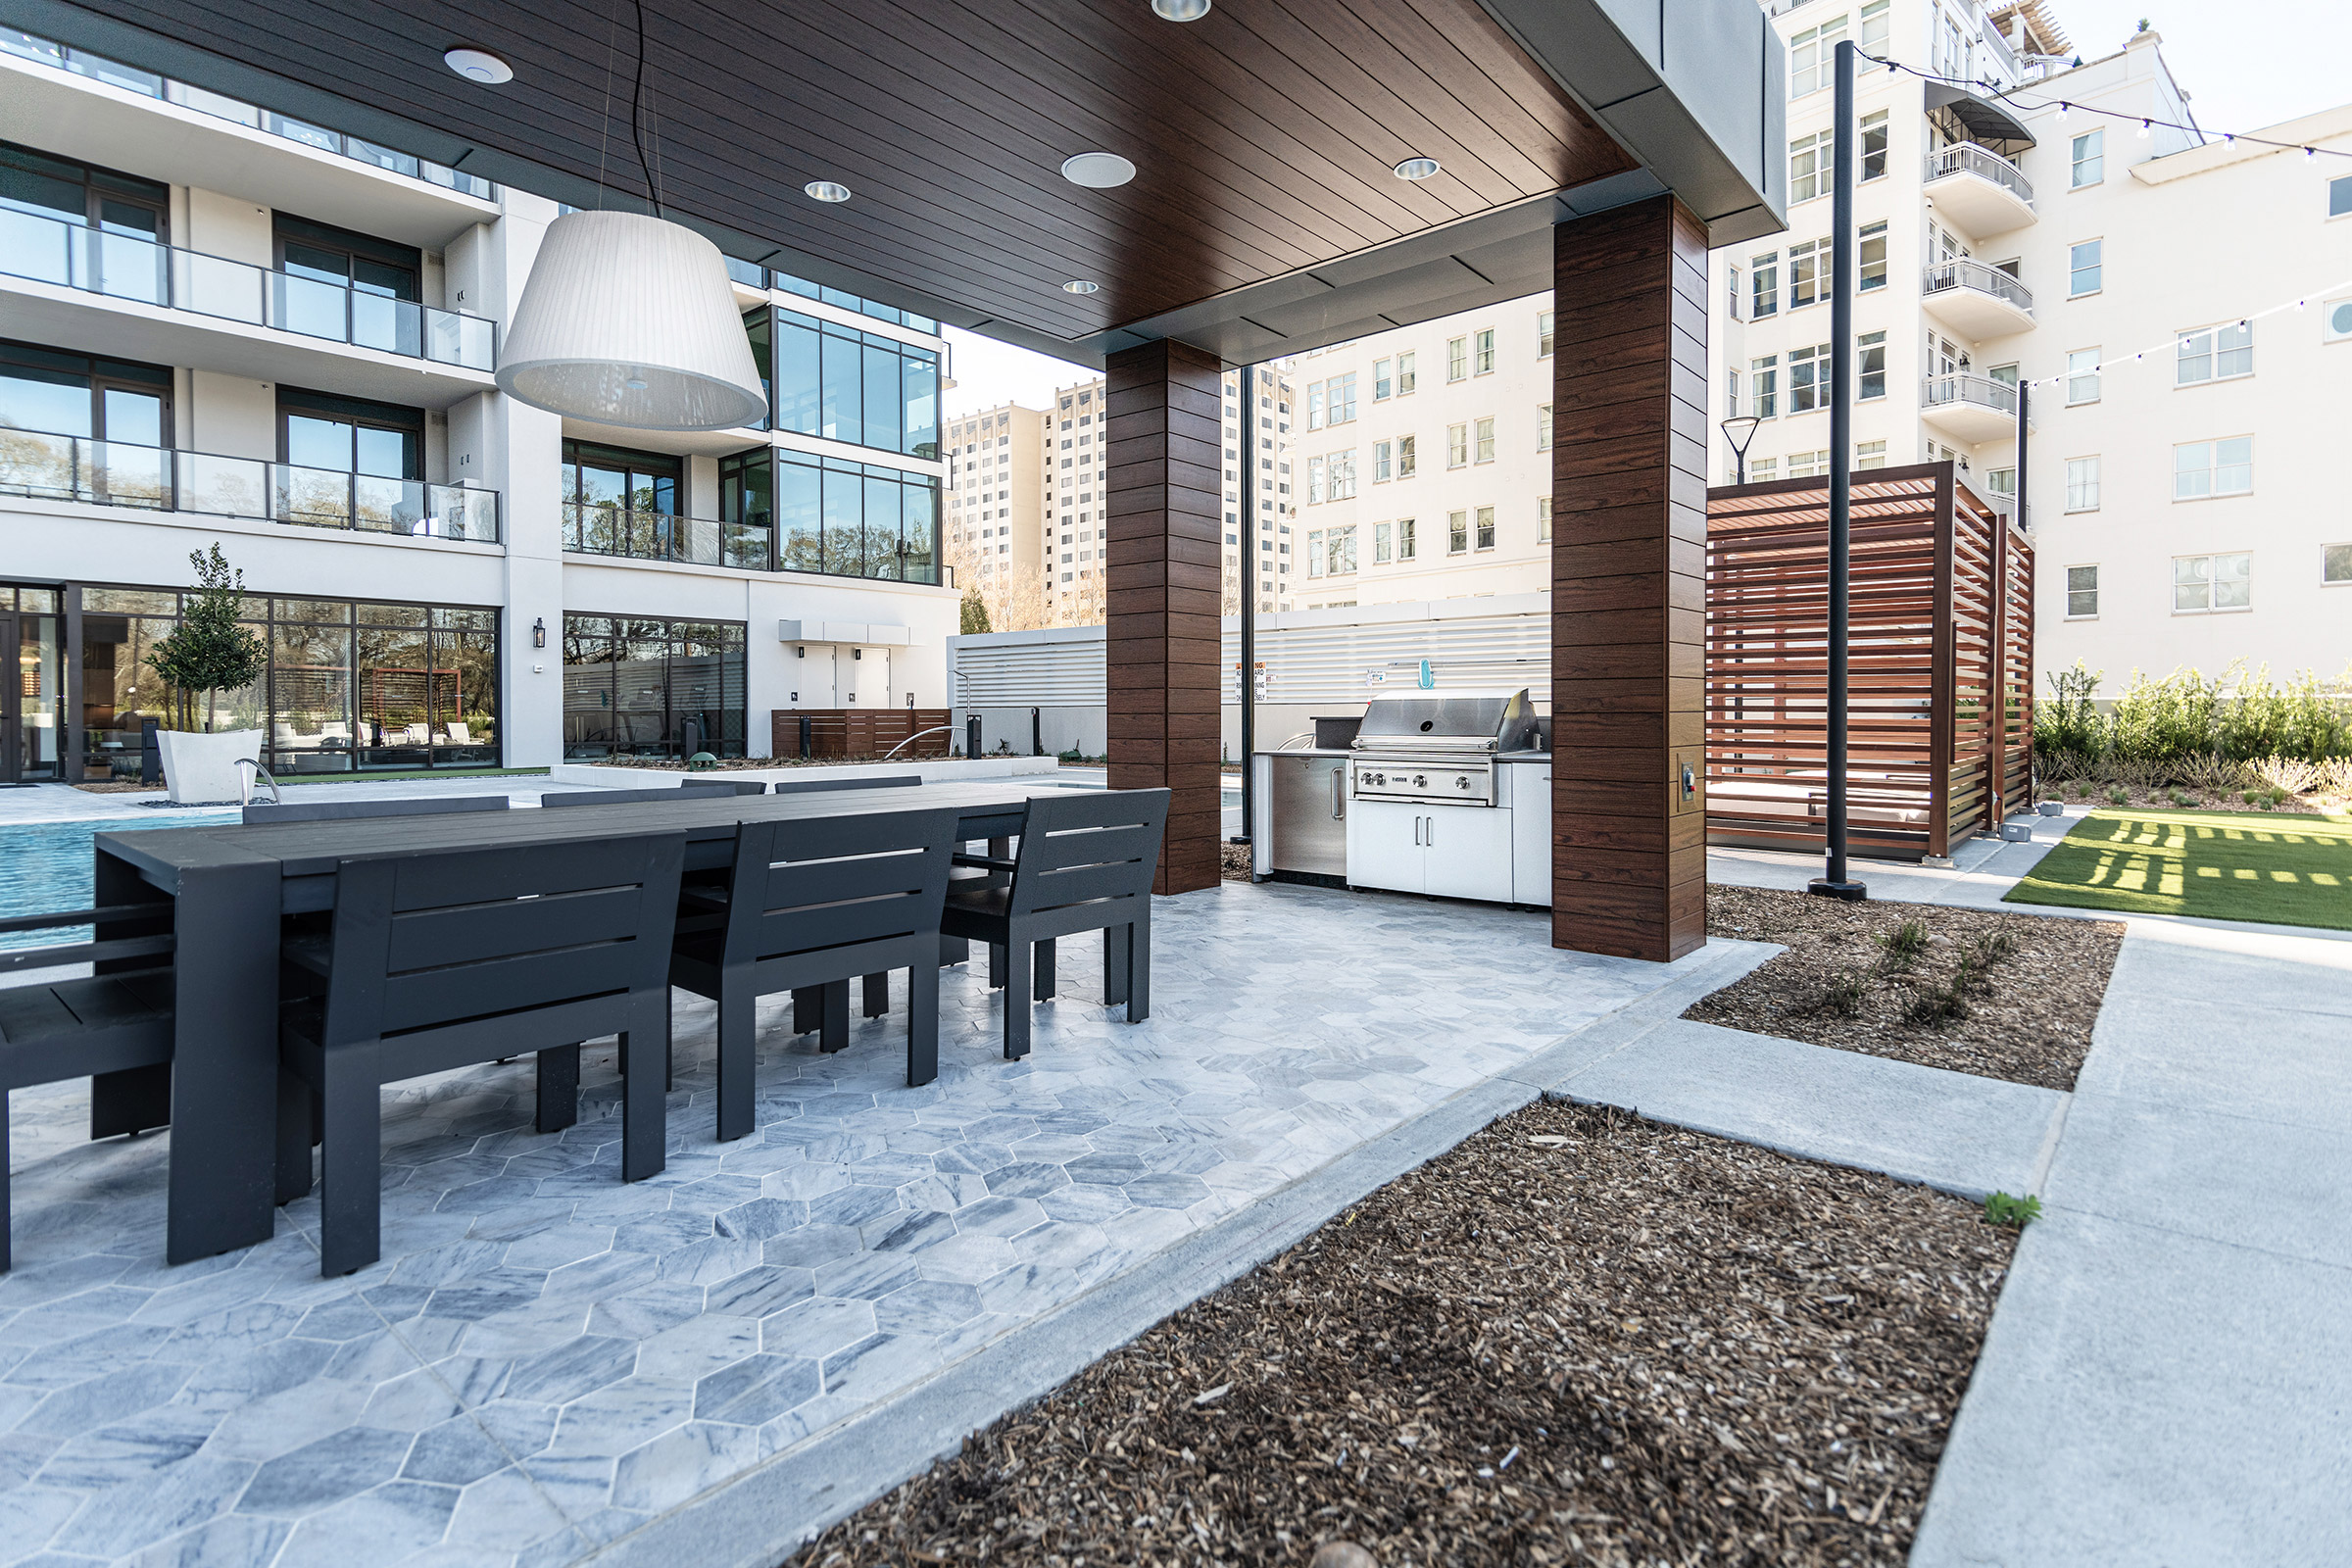 Outdoor Kitchens in Hospitality Spaces